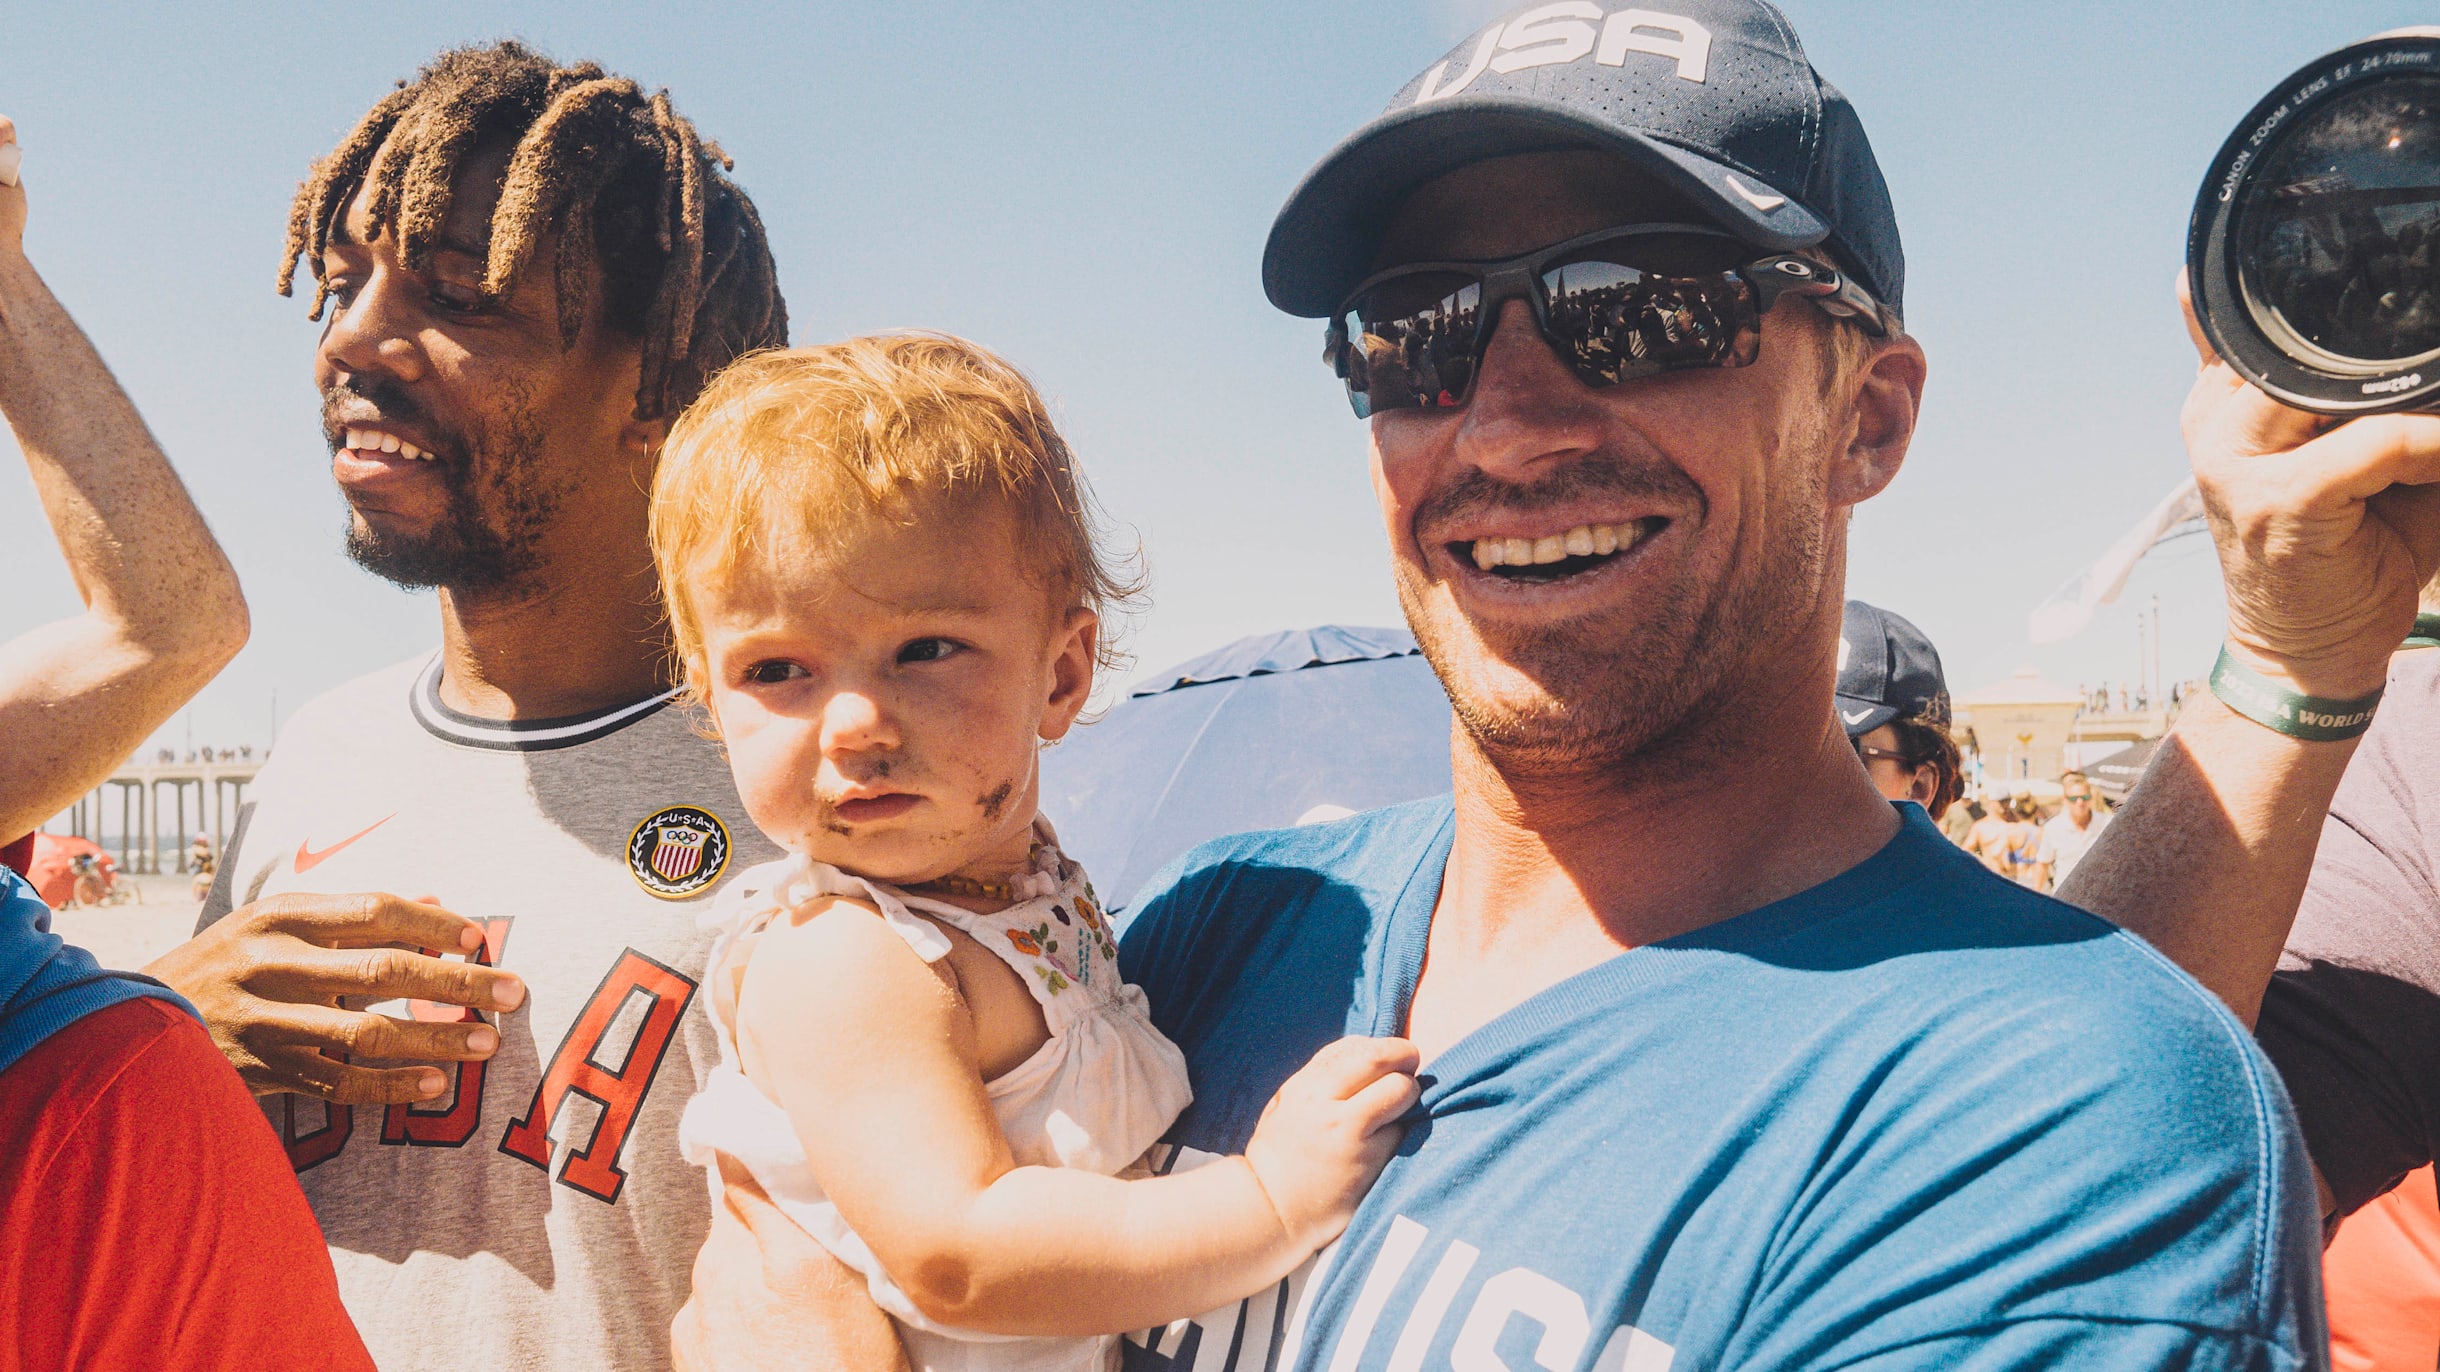 USA surf star Kolohe Andino on why becoming a father gave him a new lease of life